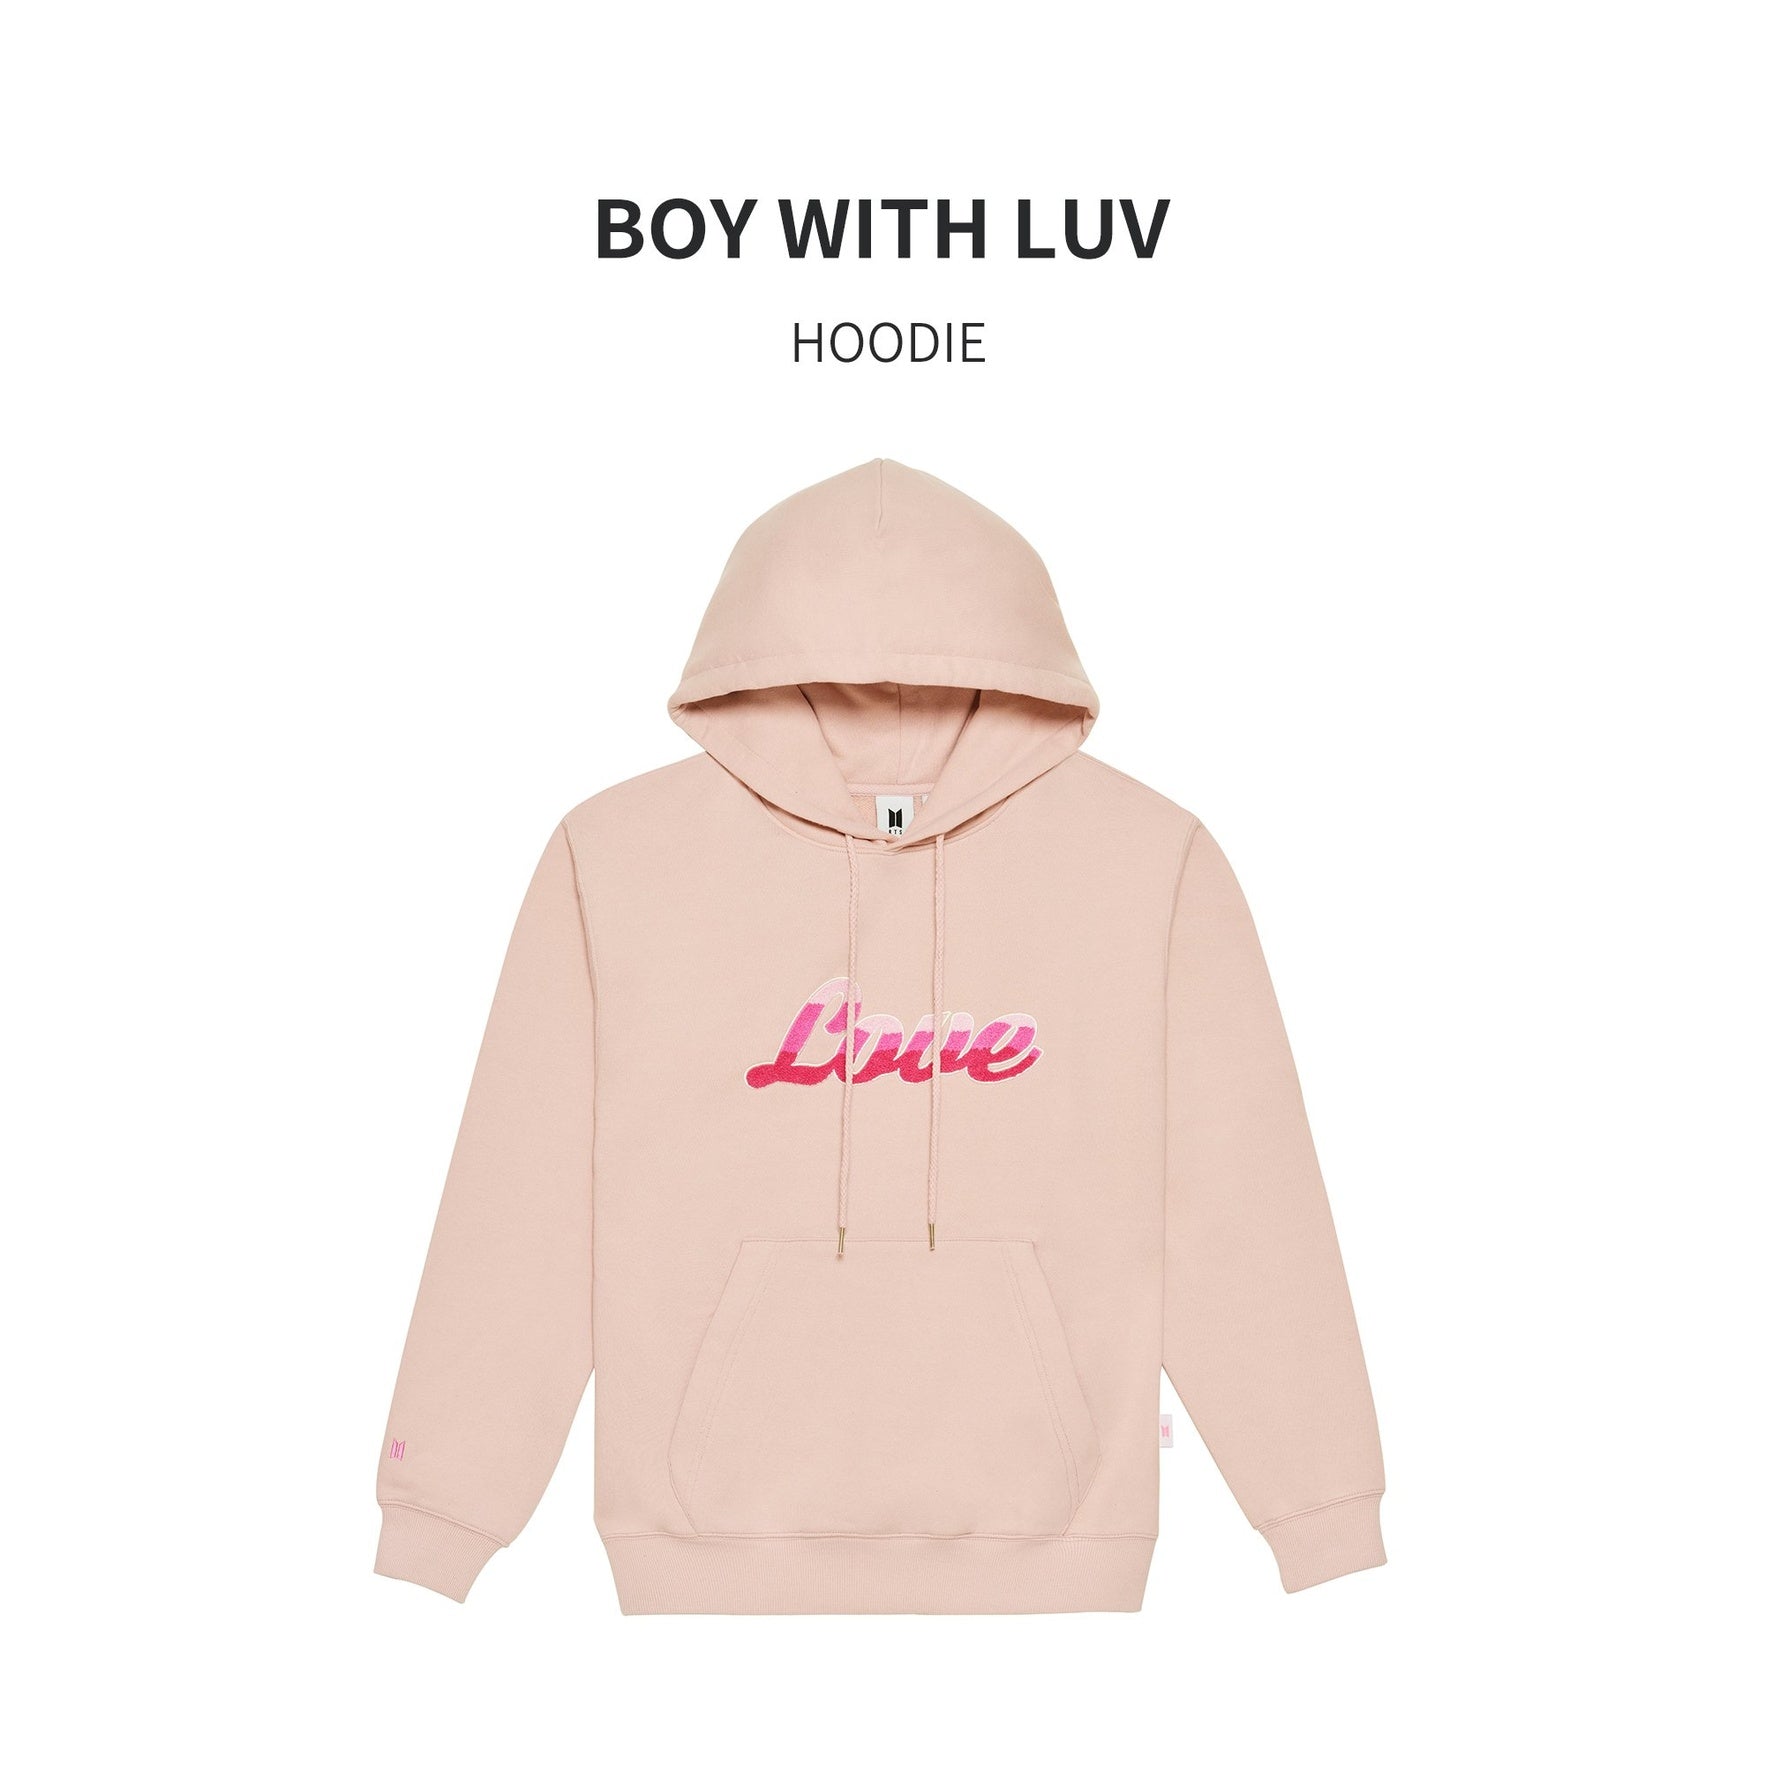 BOY WITH LUV HOODIE💜